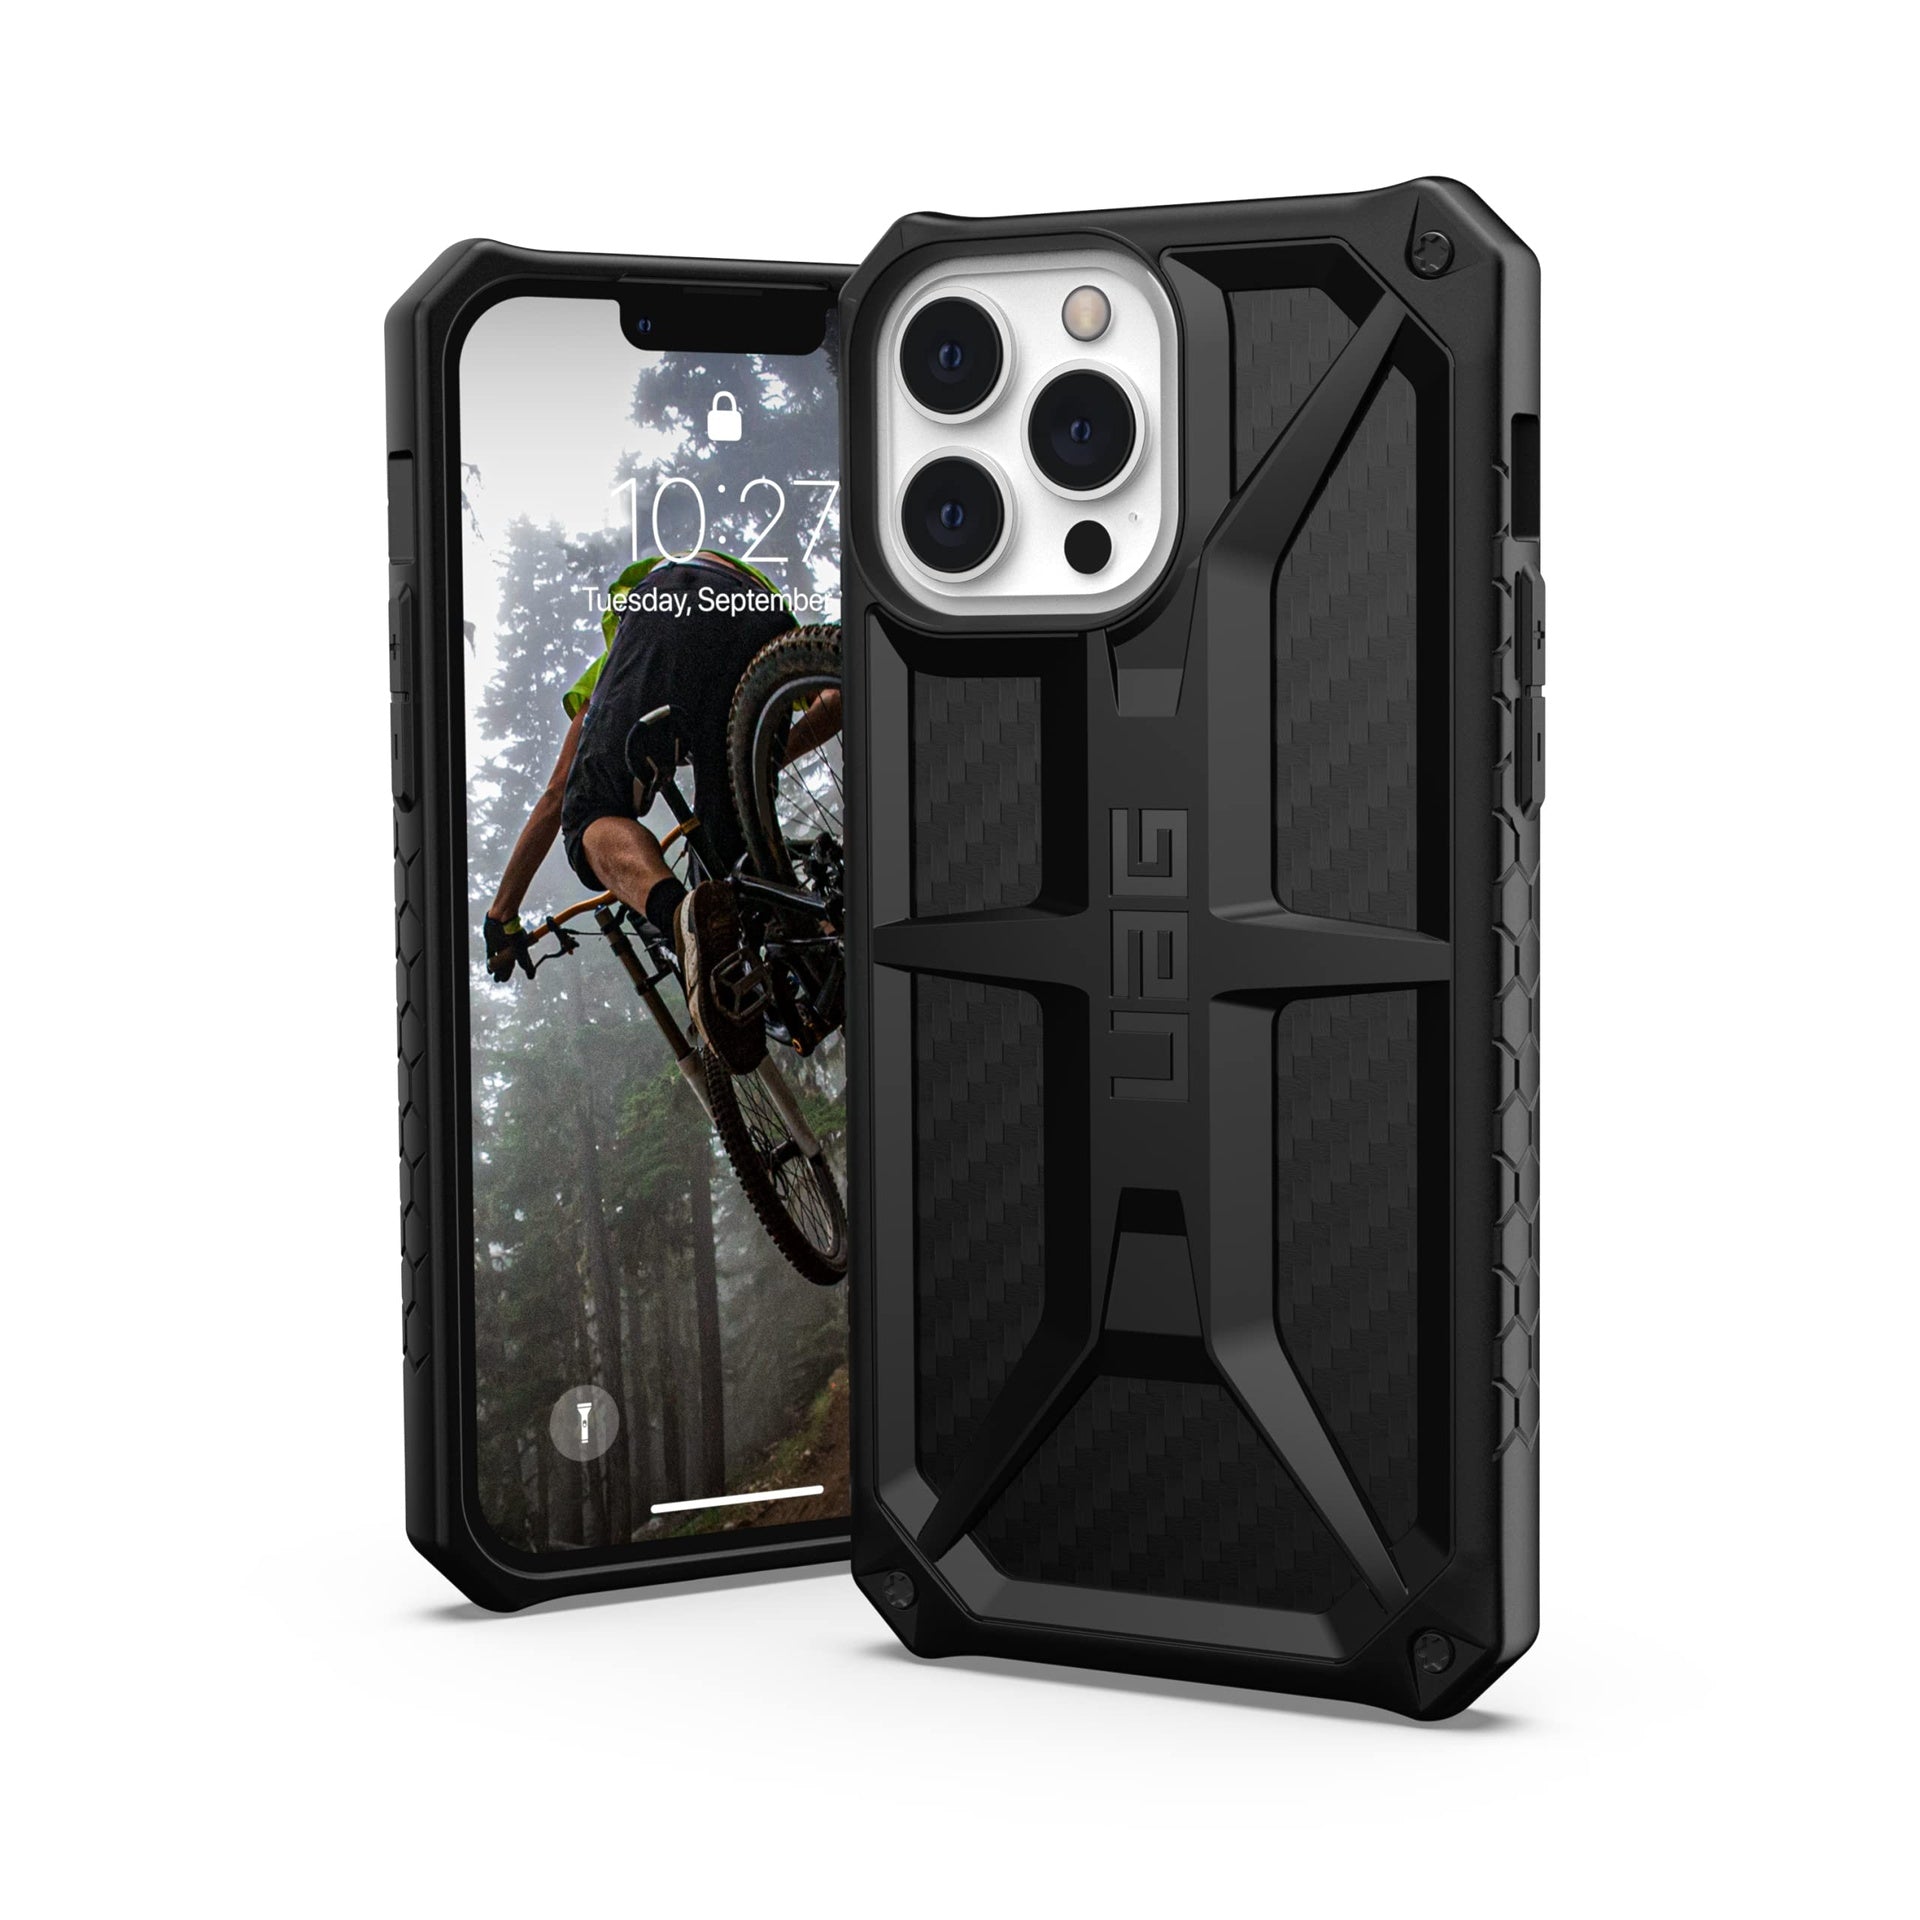 Urban Armor Gear Uag Designed For Iphone 13 Pro Max Case Carbon Fiber Rugged Lightweight Slim Shockproof Premium Monarch Protective Cover, [6.7 Inch Screen]